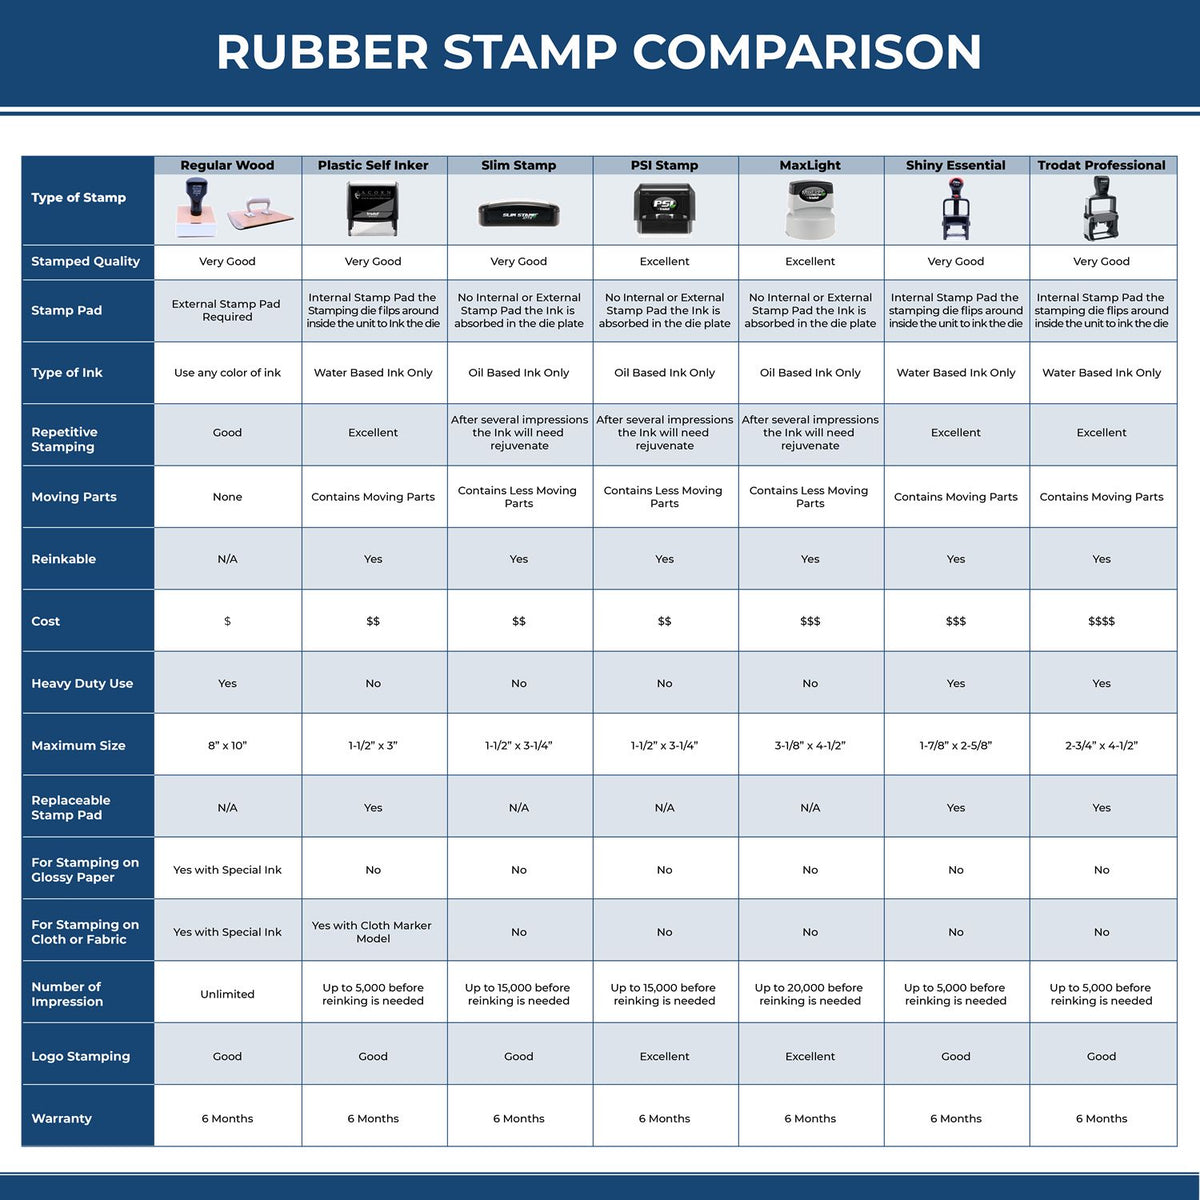 Large Self Inking Package List Enclosed Stamp 4139S Rubber Stamp Comparison